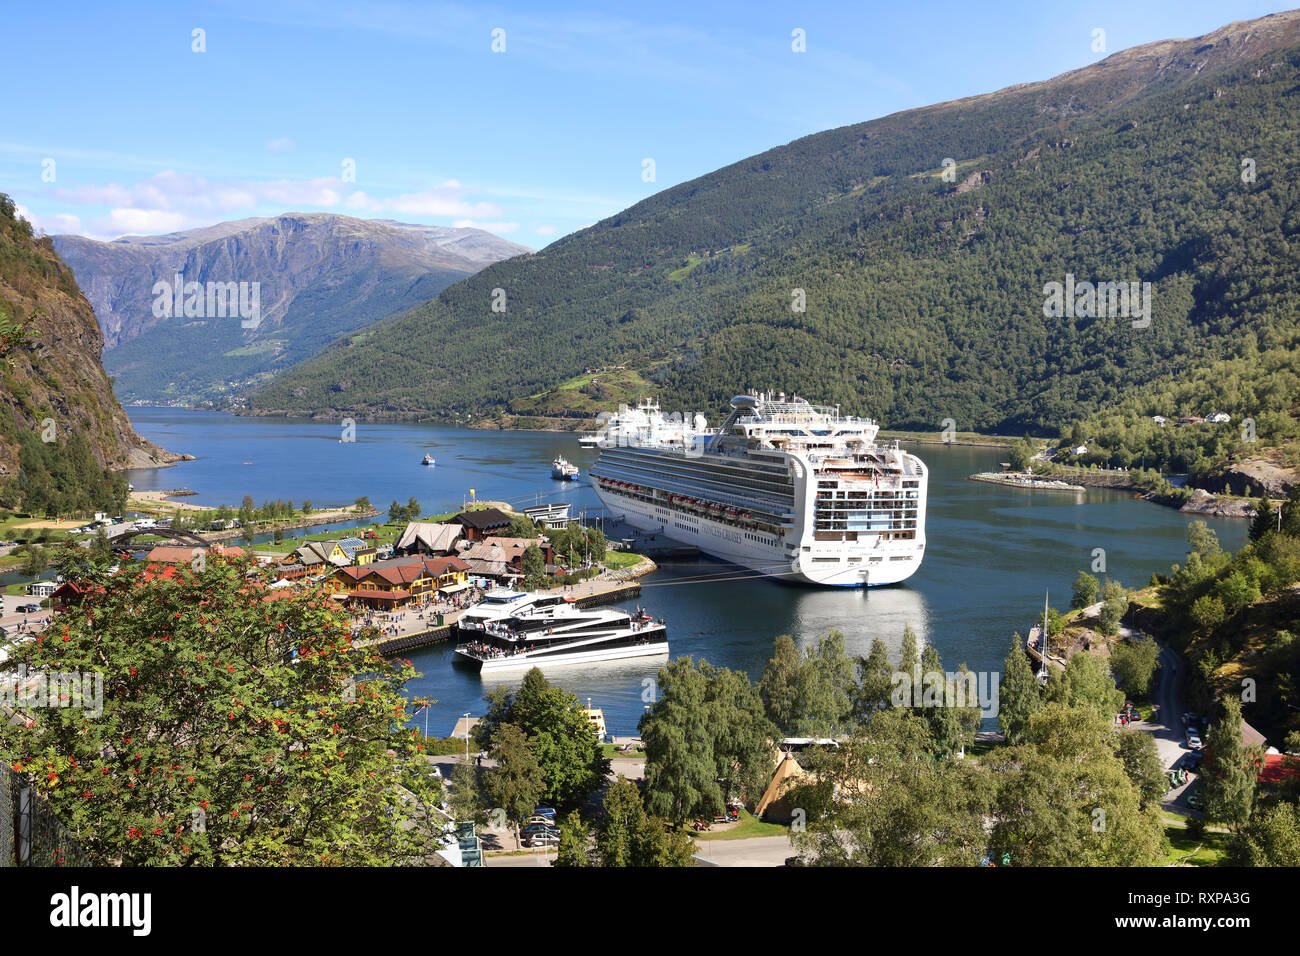 Cruise ship docked at the port of Flam, Norway. The body of water is the Aurlandsfjord Stock Photo